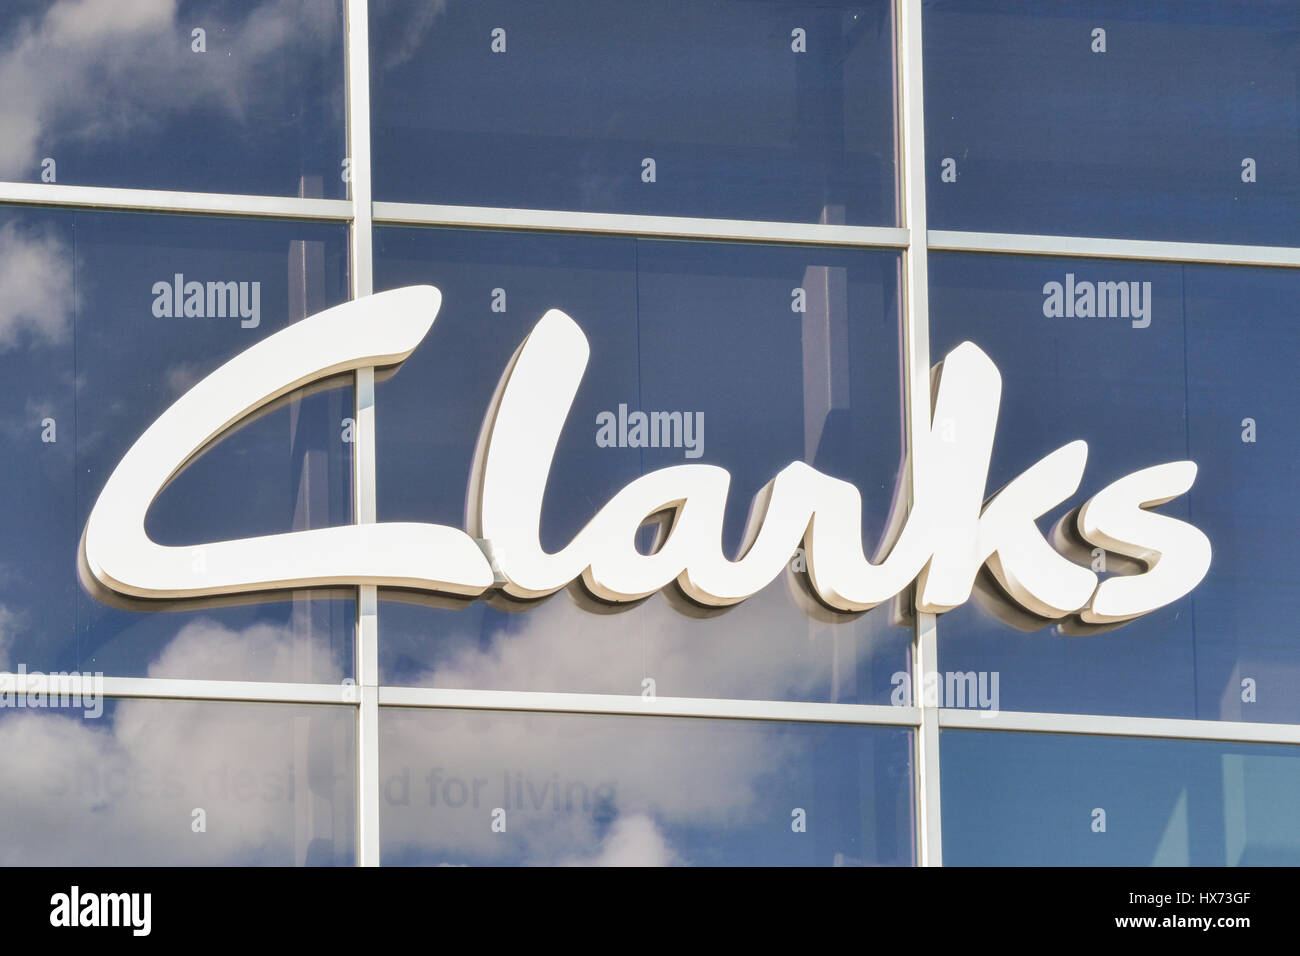 Chaussures Clarks logo sign Banque D'Images